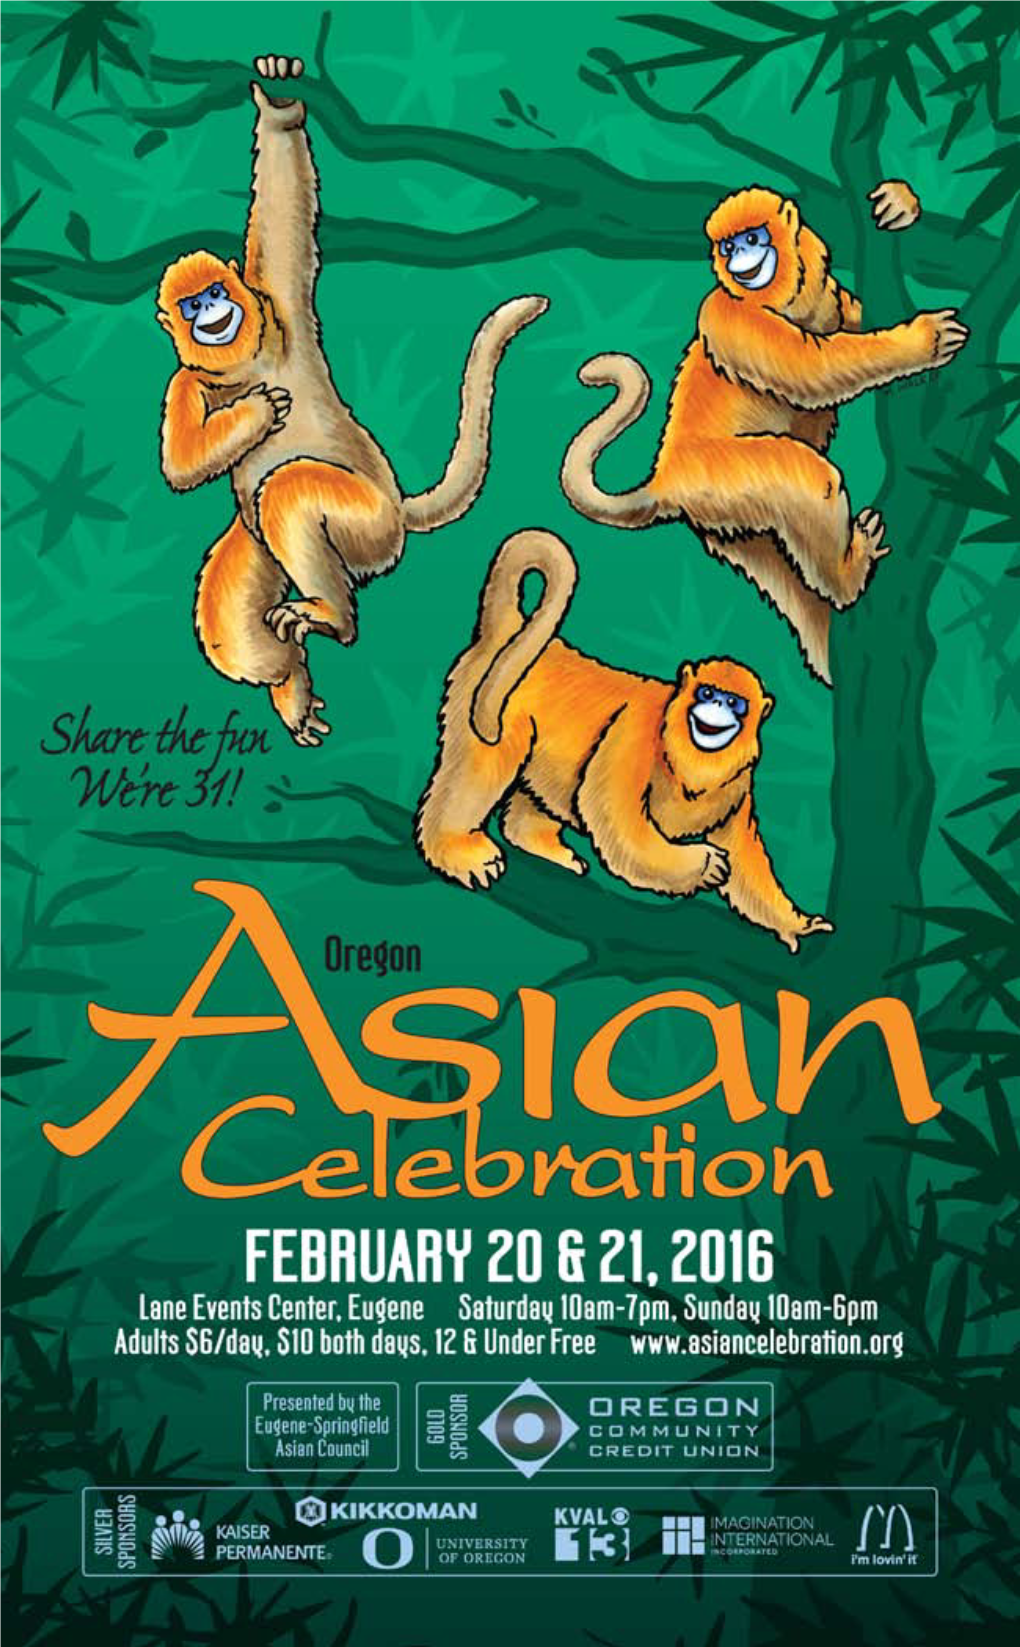 Best Wishes for Another Successful Asian Celebration!